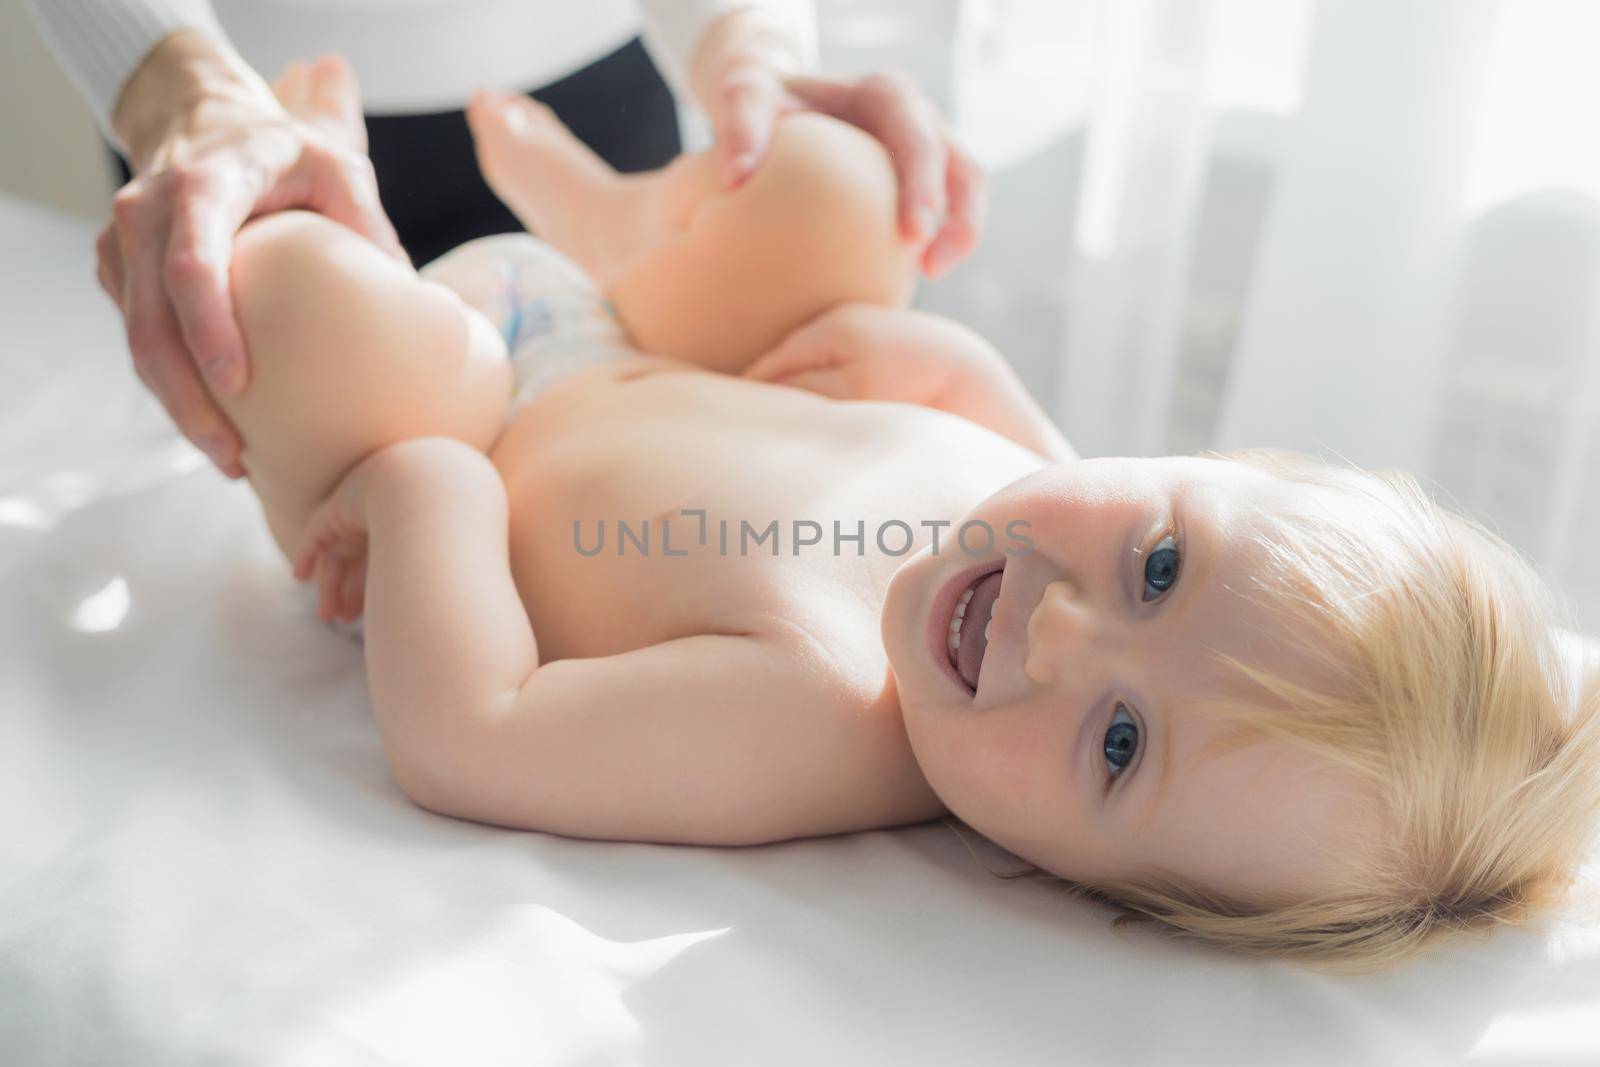 Mom does baby gymnastics for the baby's legs. Close-up. by Yurich32